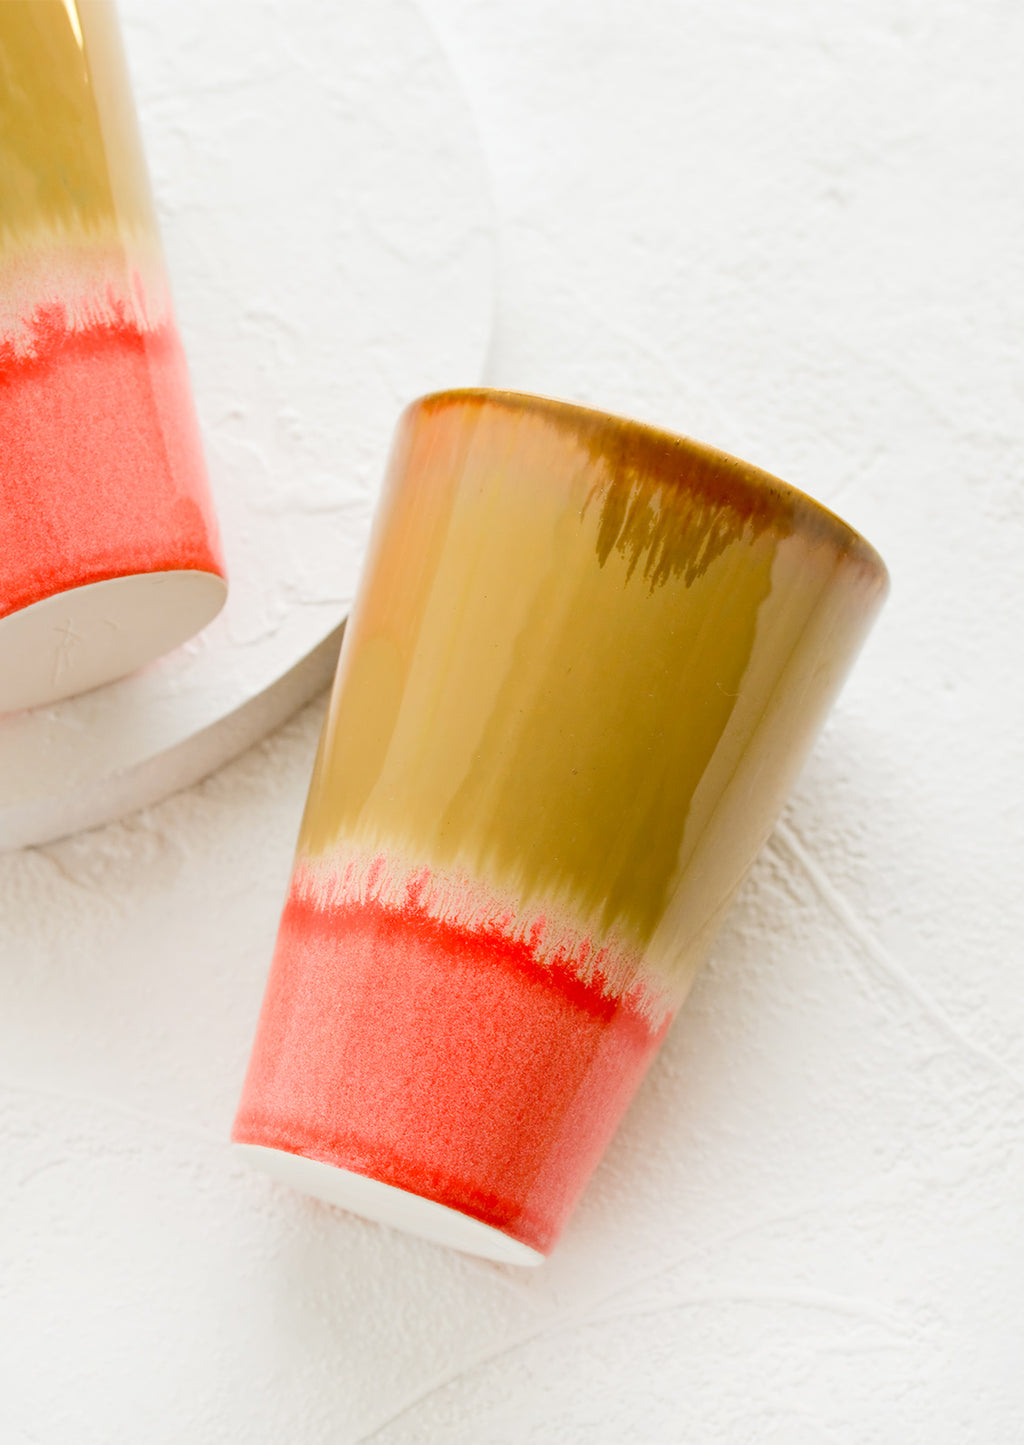 Brown / Neon Pink: A ceramic cup in brown and pink.